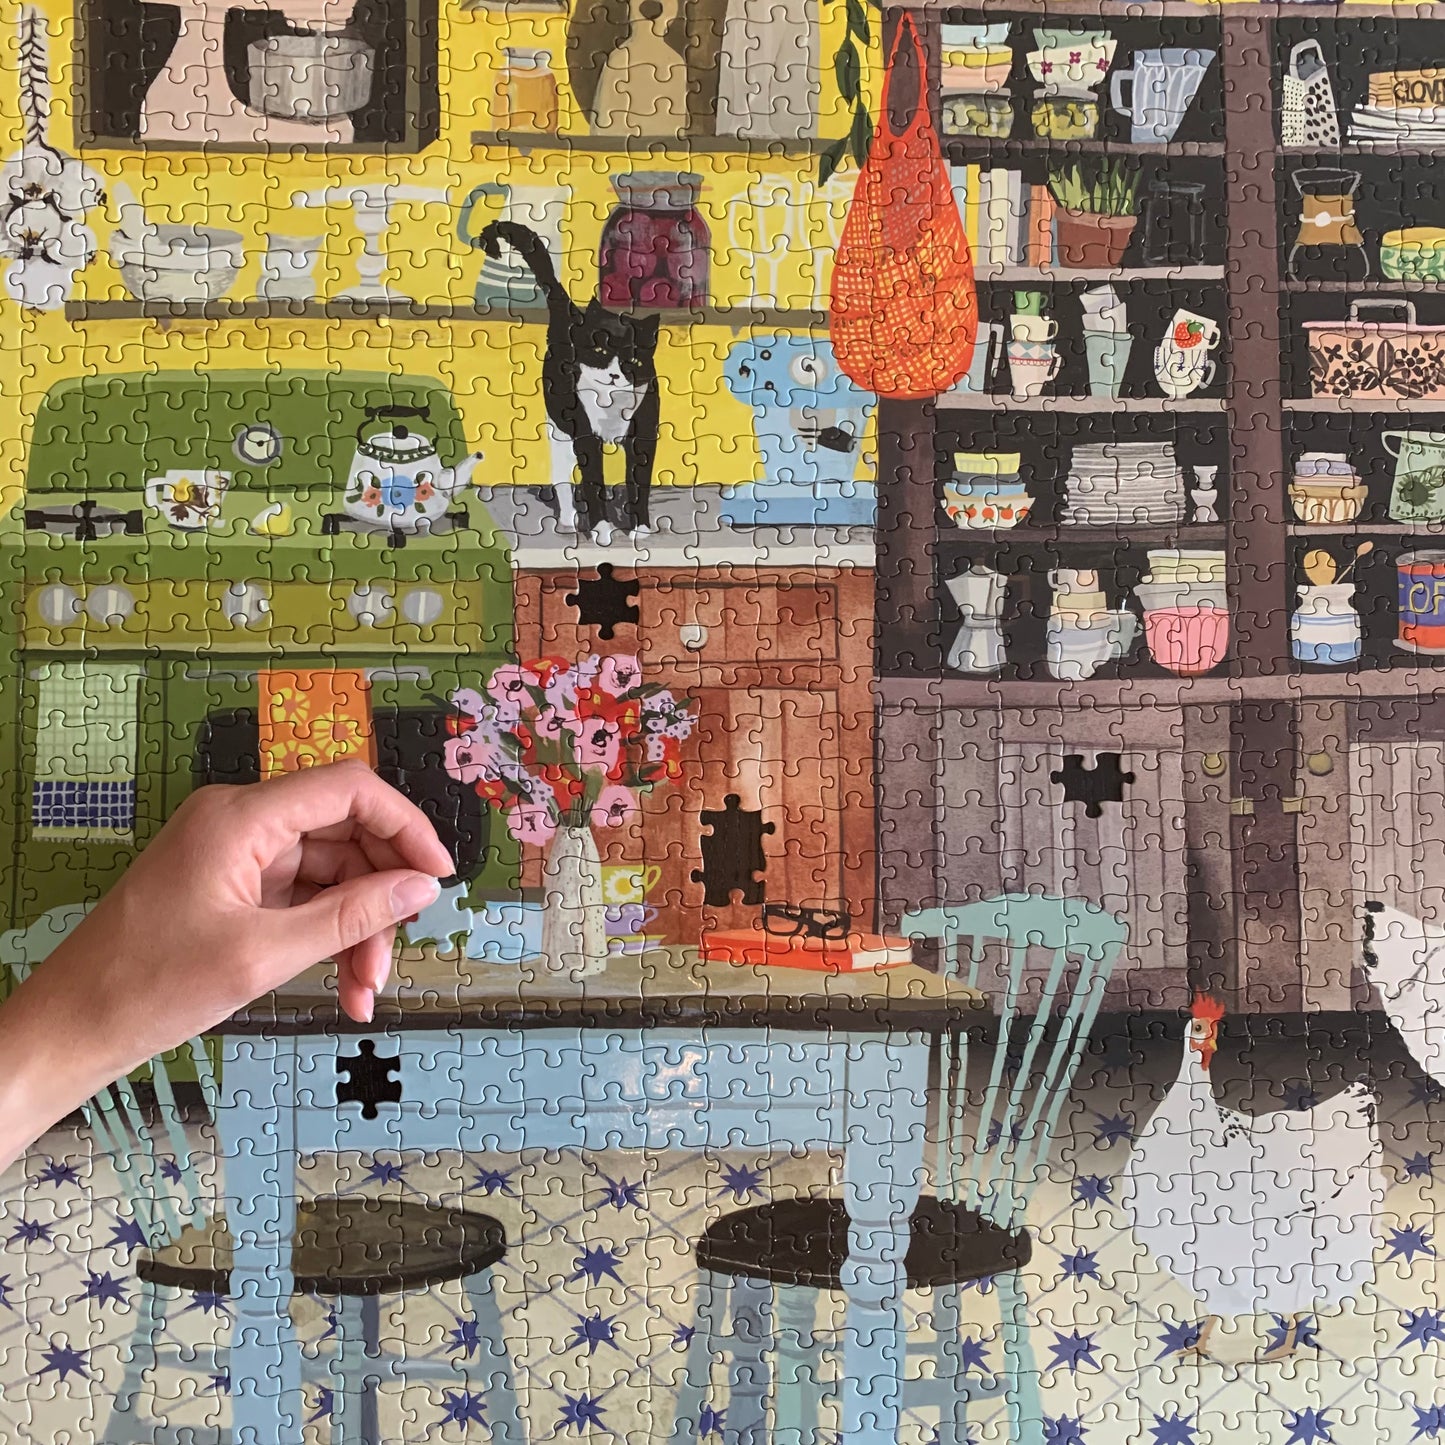 Kitchen Chickens and Cat 1000 Piece Jigsaw Puzzle | eeBoo Piece & Love | Farmhouse Nostalgia Gift